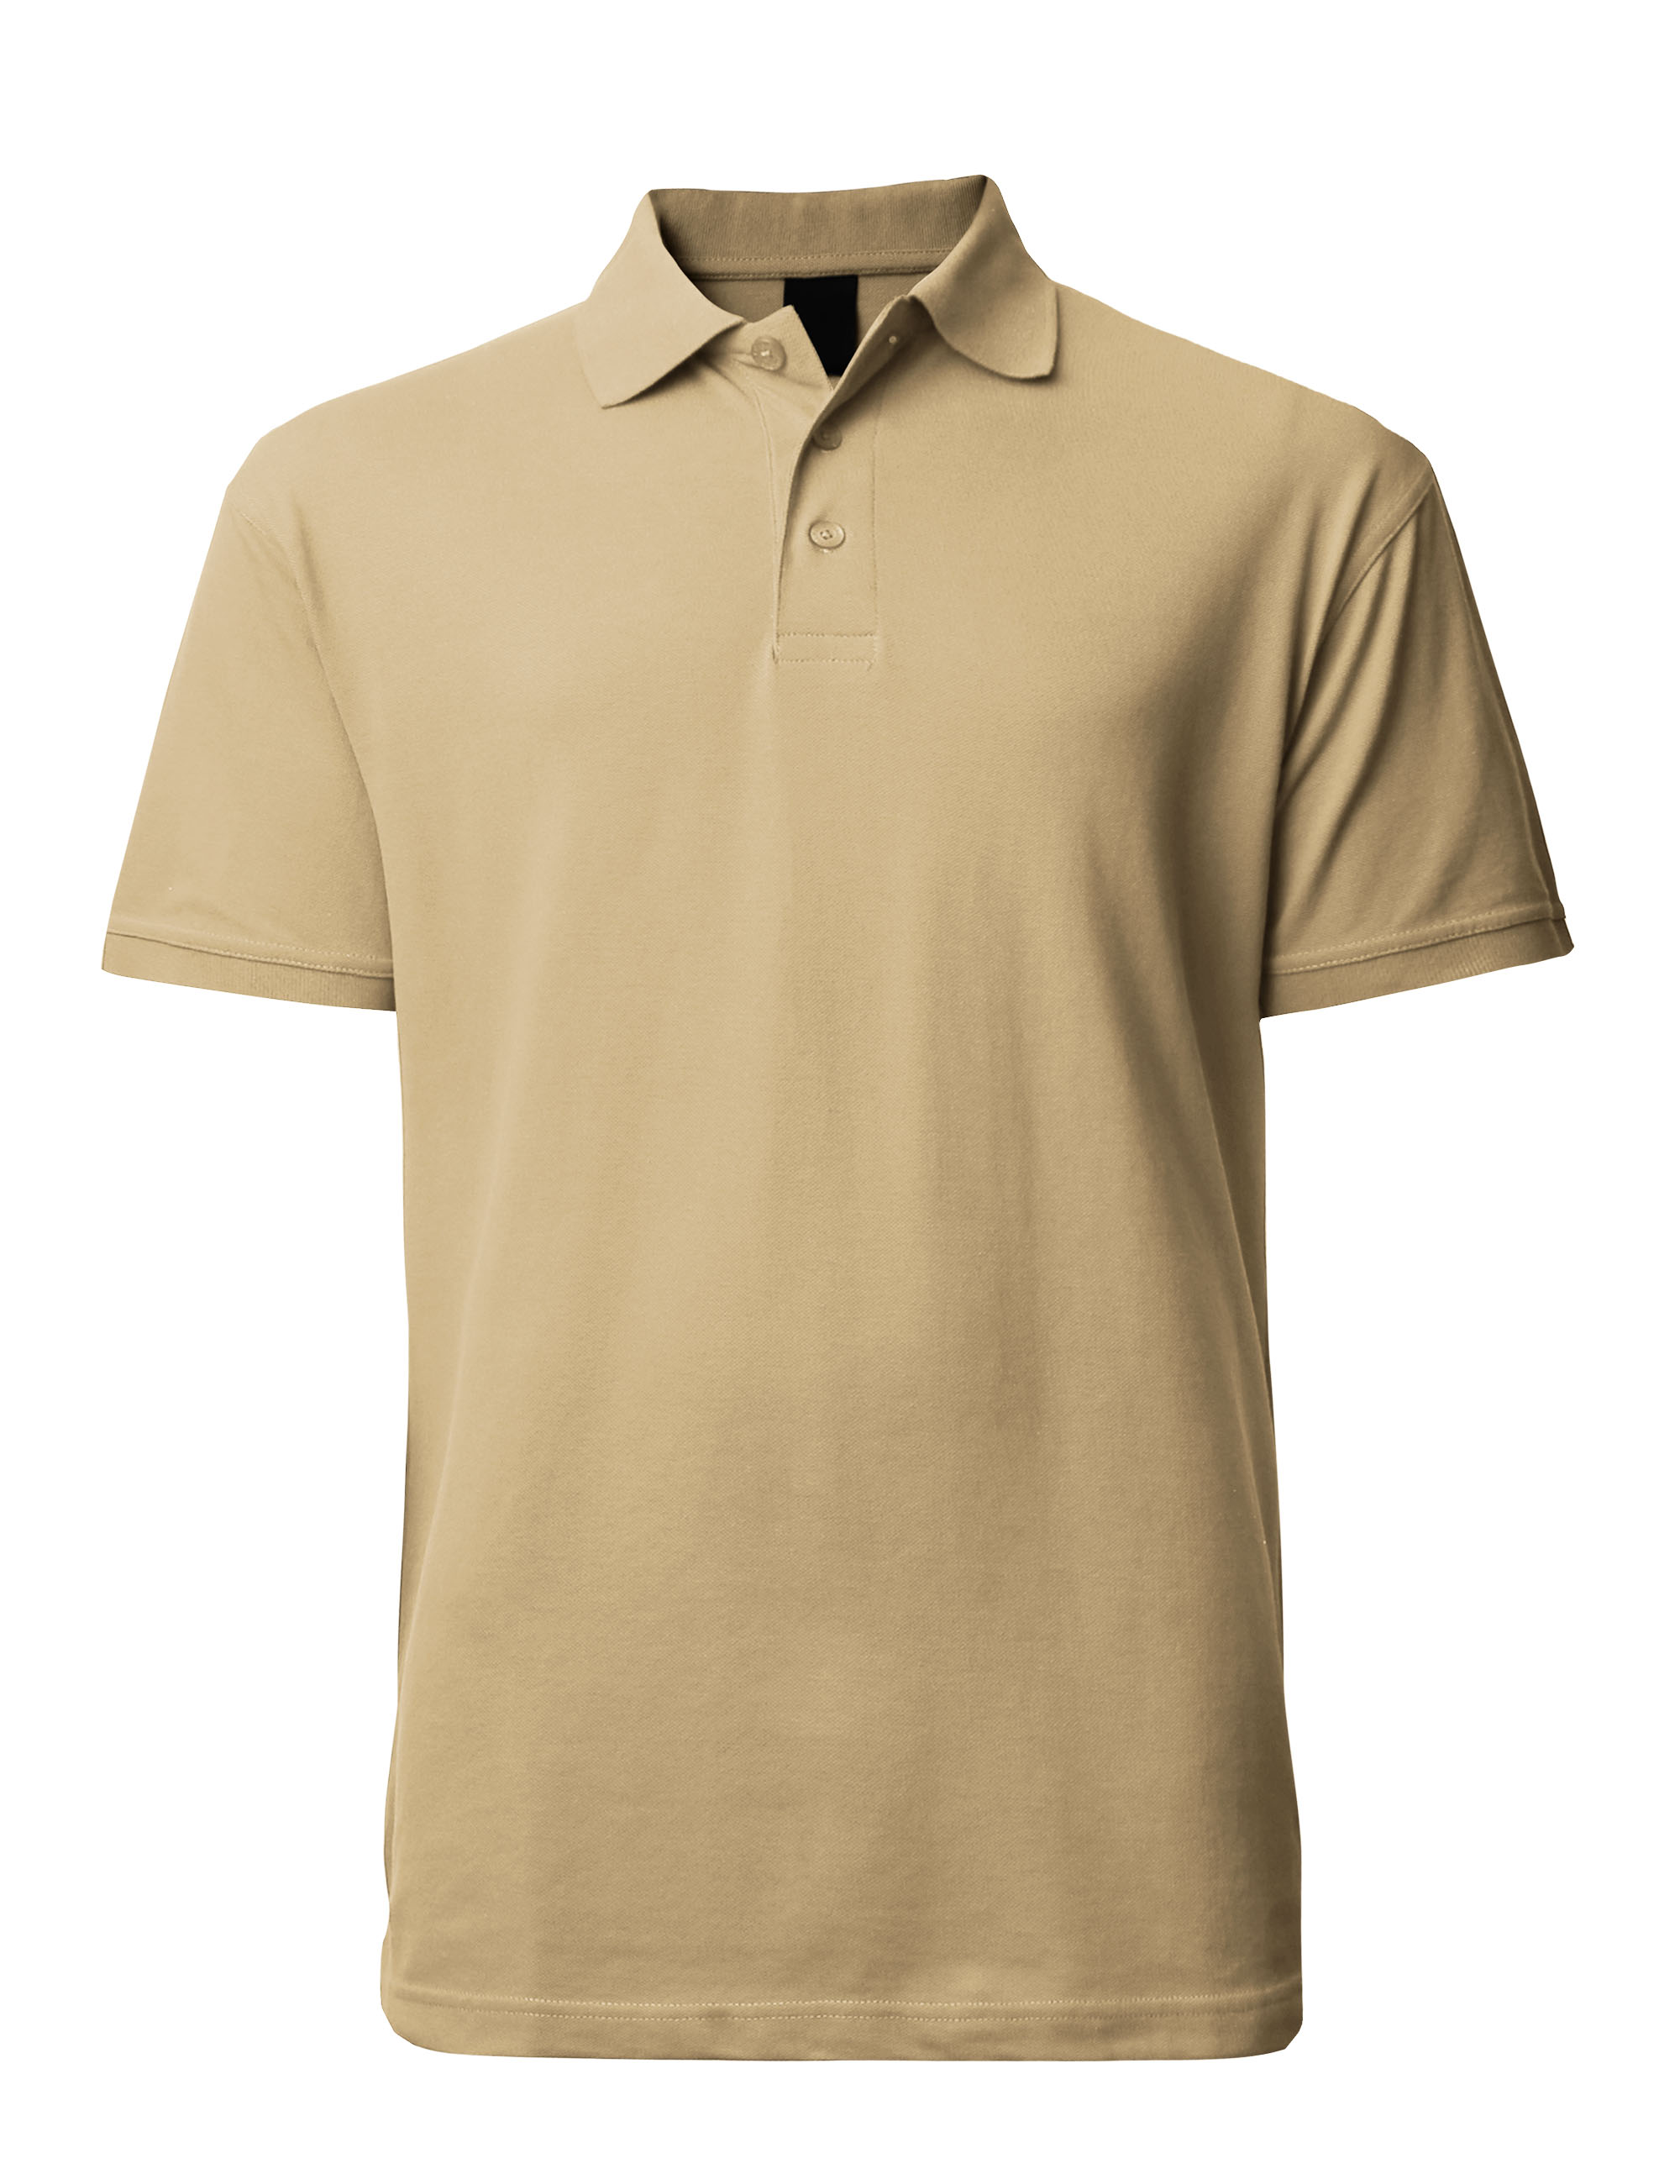 Hat and Beyond Mens Polo Shirts Comfort Regular Fit Pique Solid Uniform Gold Tee Jersey